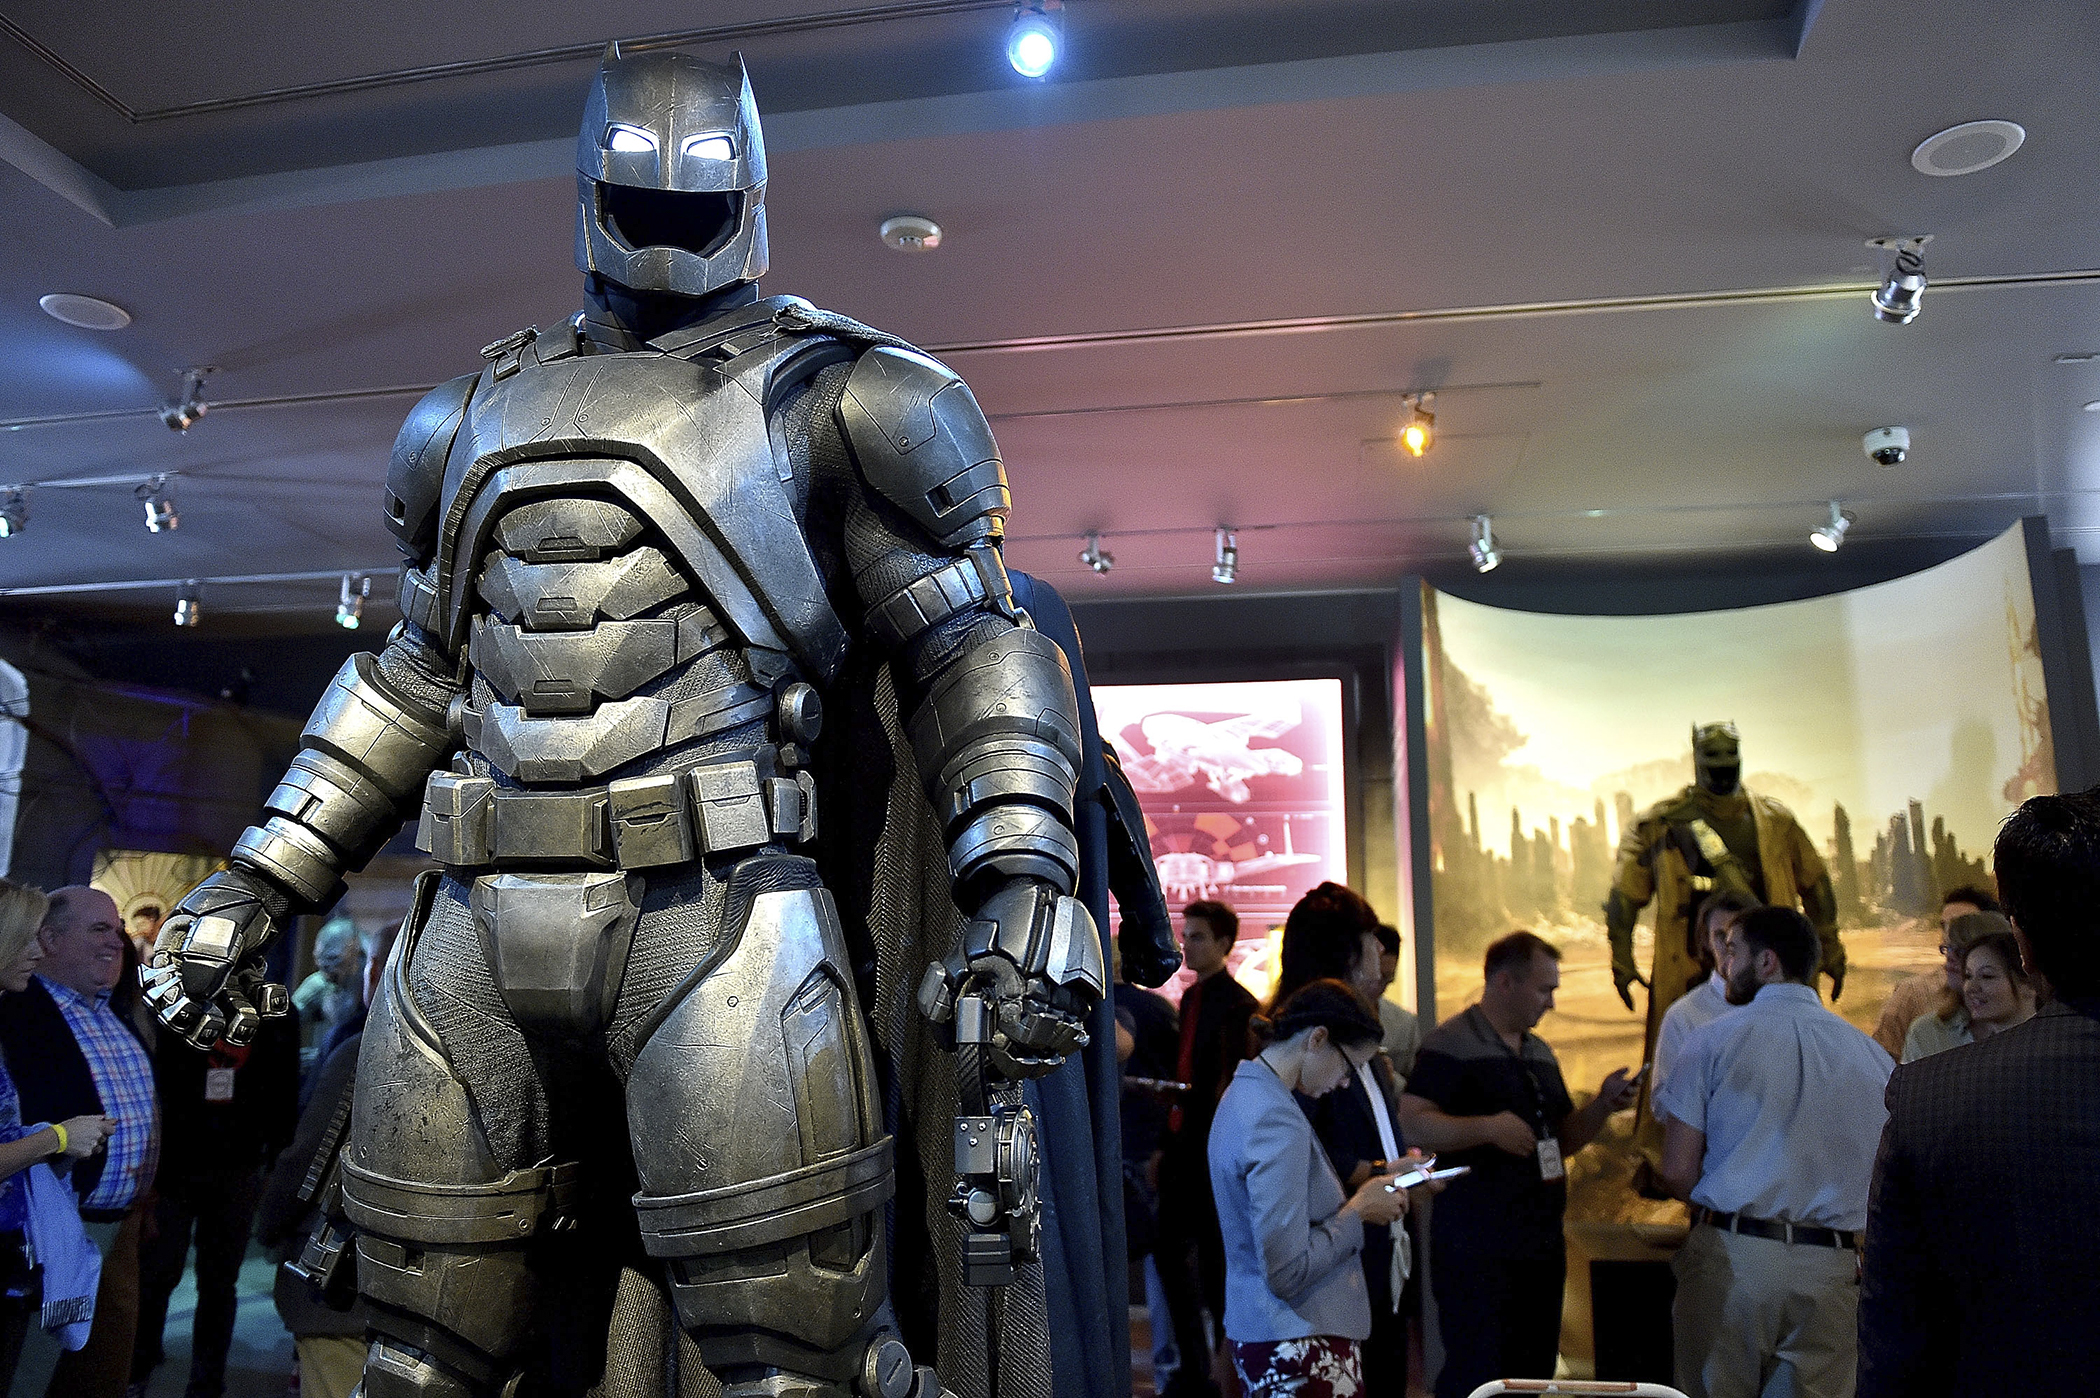 A general view of the atmosphere during Warner Bros. Studio Tour Hollywood launches DC Universe: The Exhibit - featuring the greatest Super Heroes and Super-Villains on May 18, 2016 in Hollywood, California.